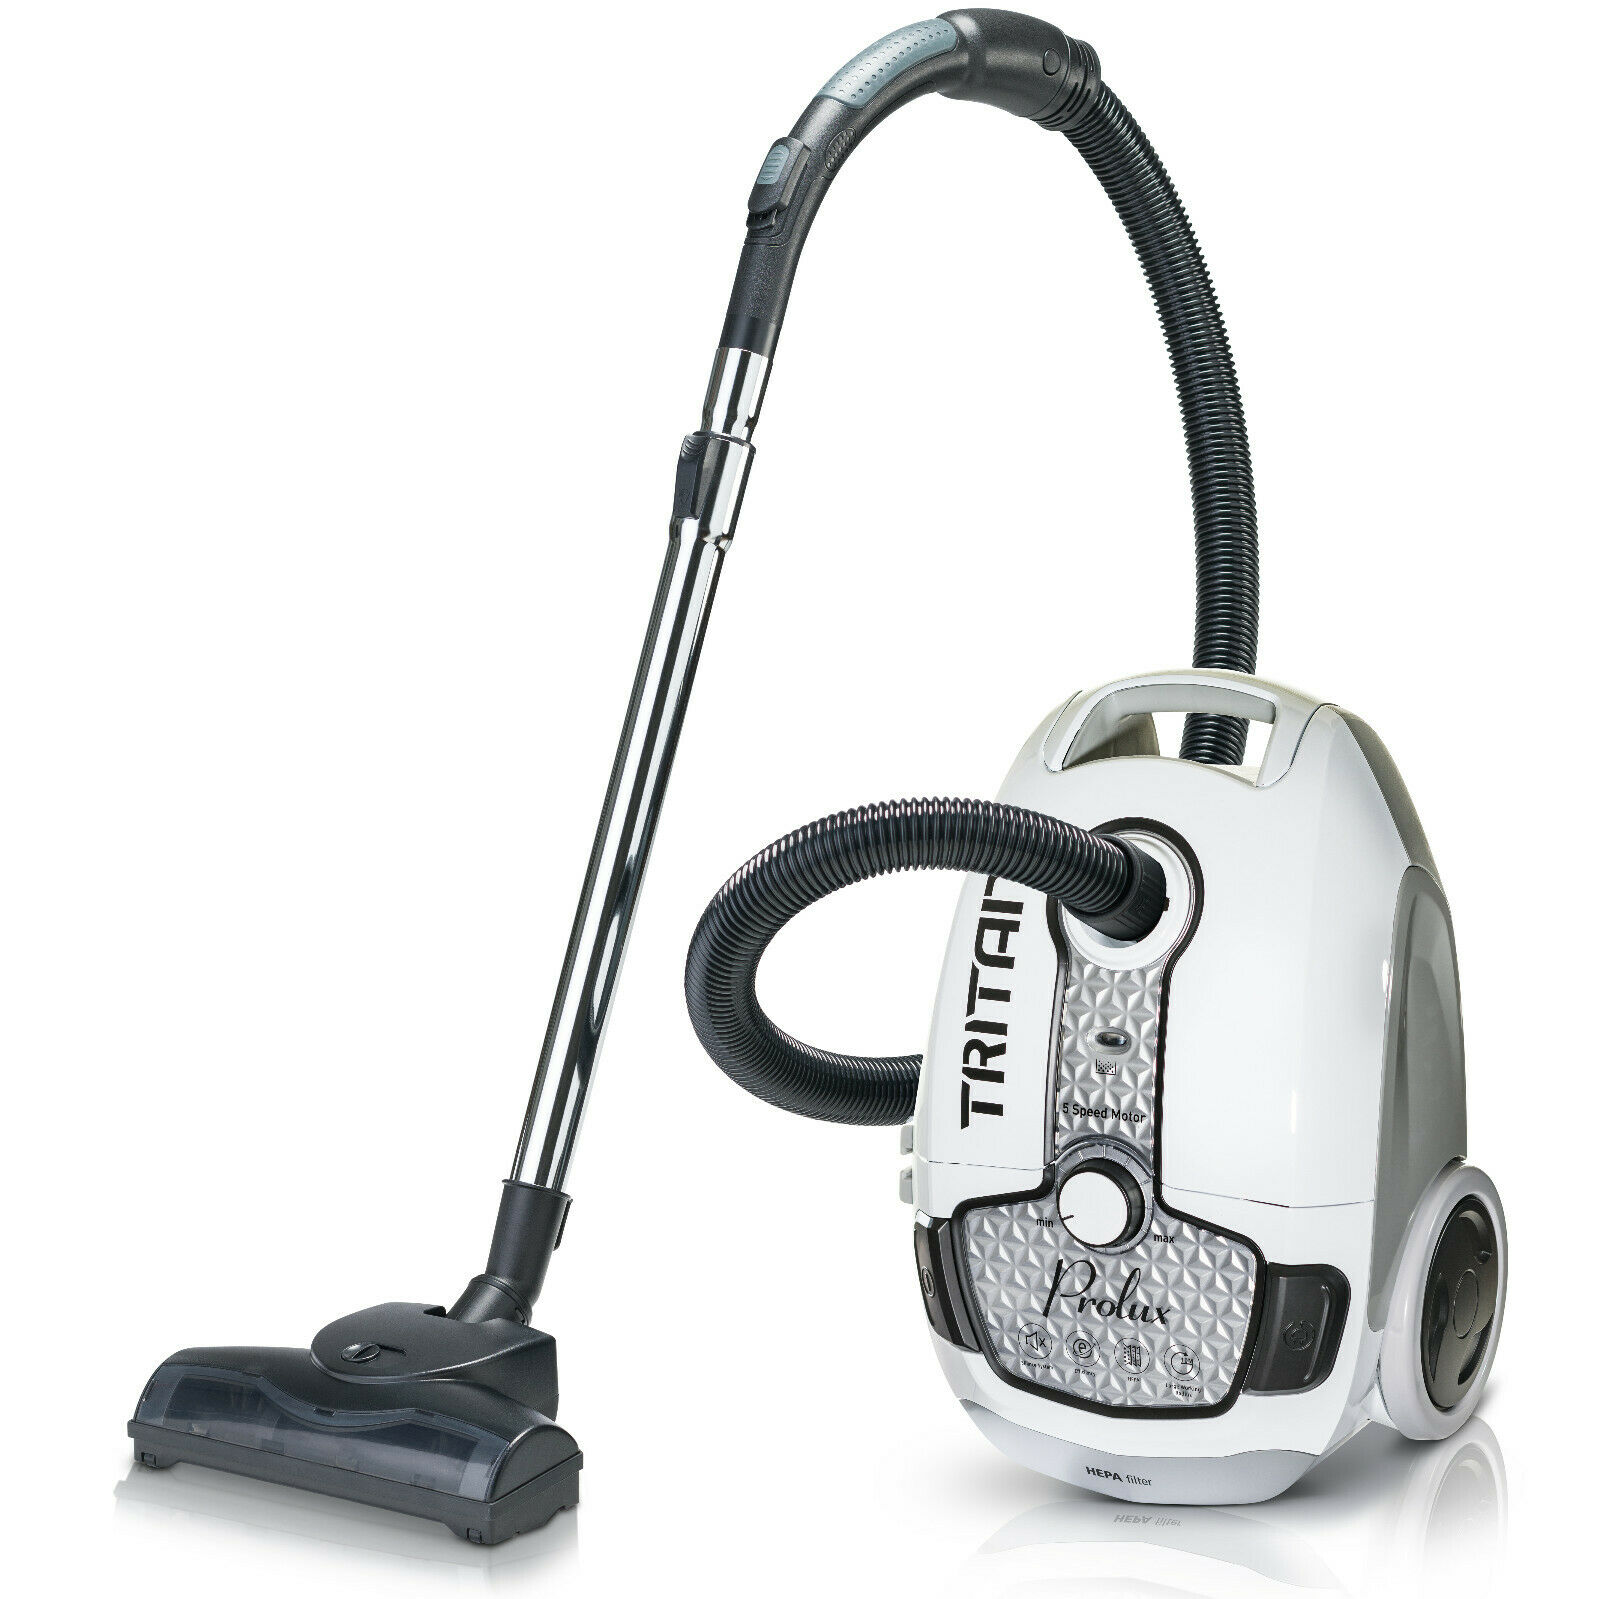 Prolux Tritan White Canister Vacuum Cleaner w/ HEPA Filter Certified Refurbished